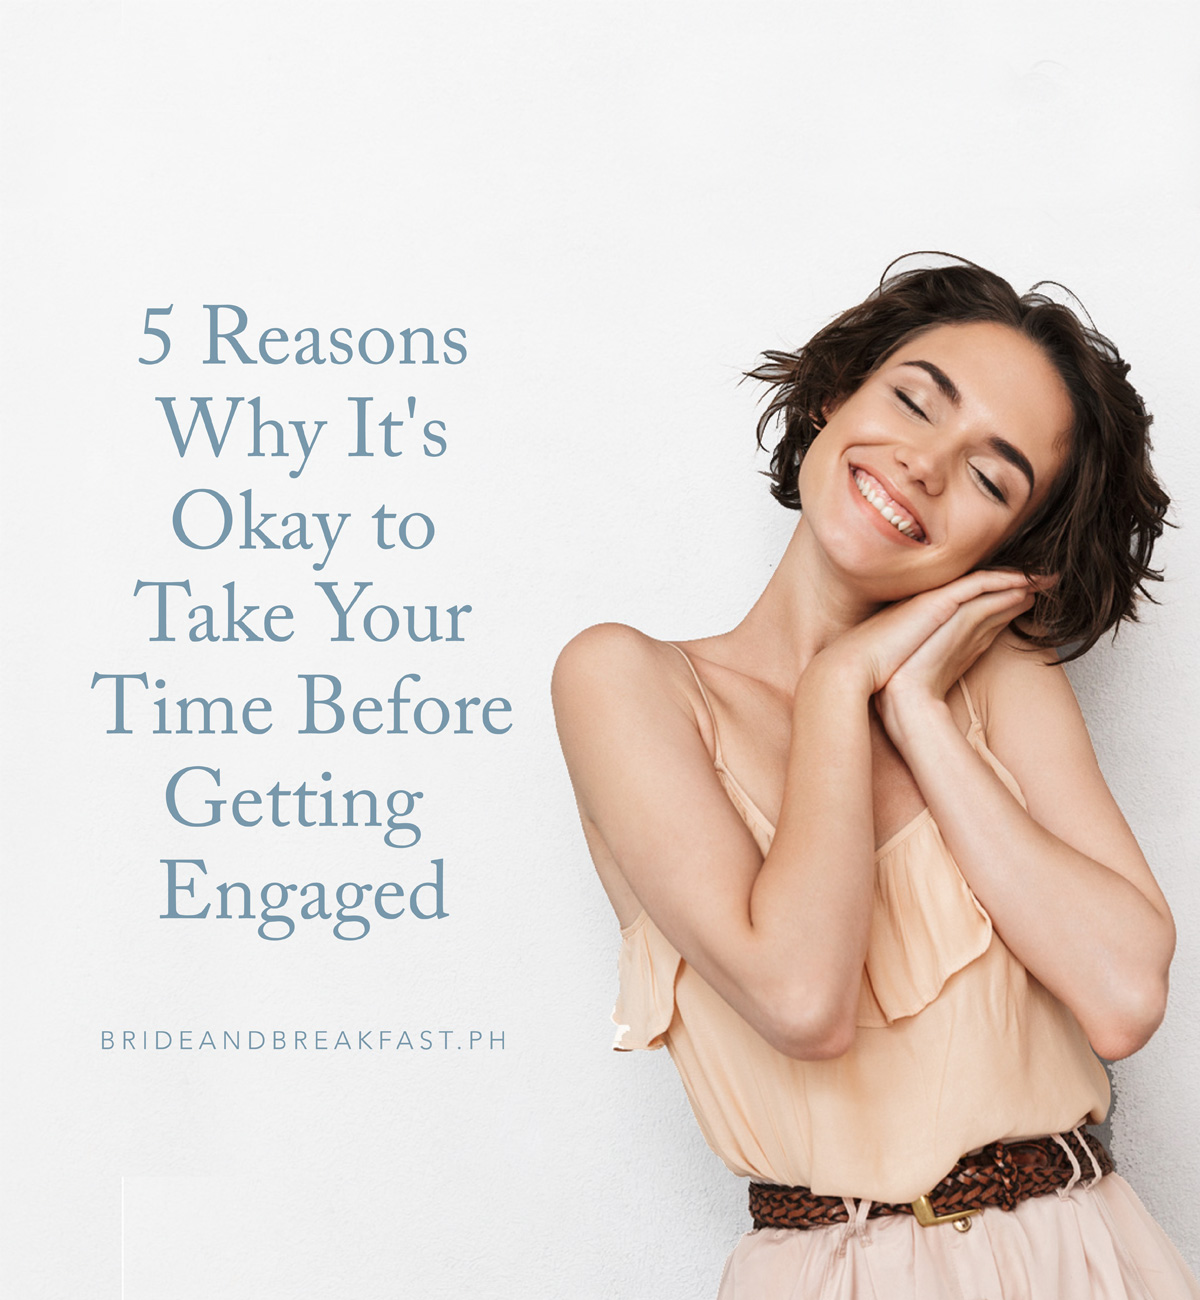 5 Reasons Why It's Okay to Take Your Time Before Getting Engaged